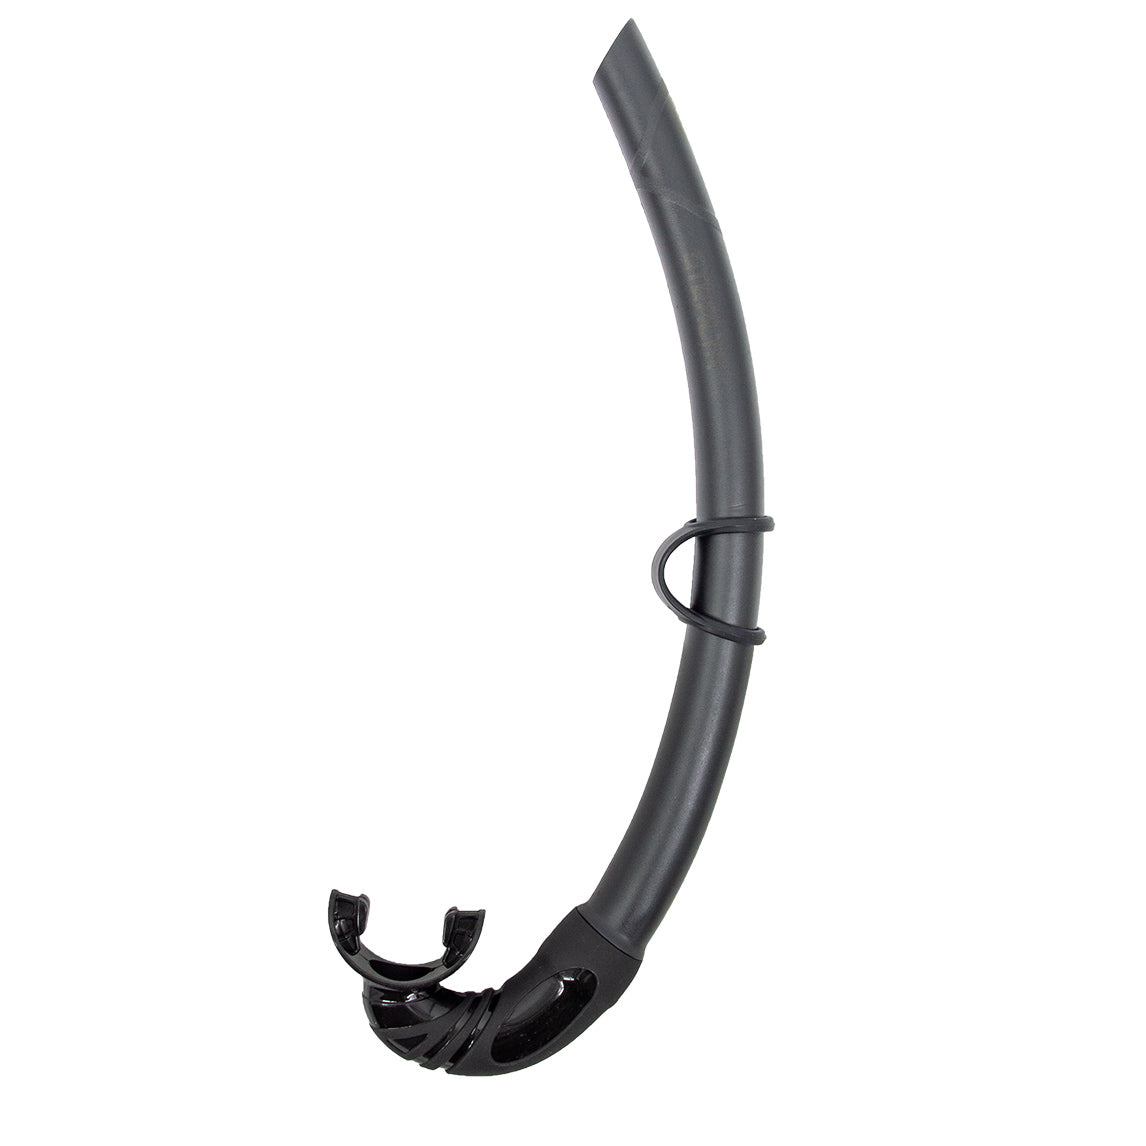 Genesis Stealth Snorkel J-Tube Snorkel for Free Diving, Spearfishing, Scuba, and Snorkeling